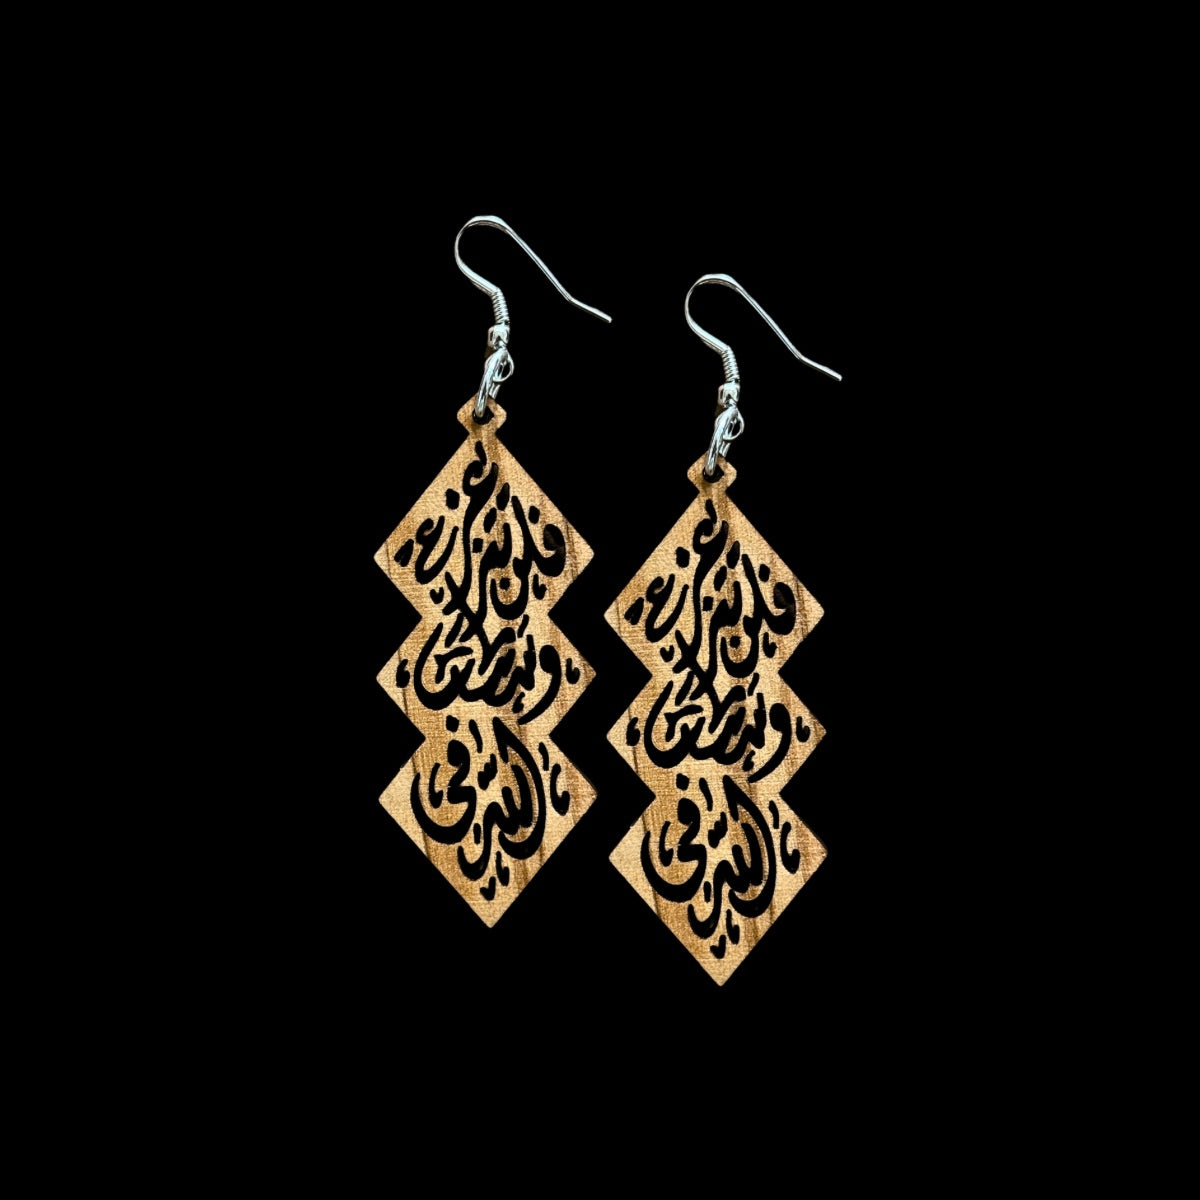 Olive Wood Arabic Calligraphy Earrings "God is within her..."